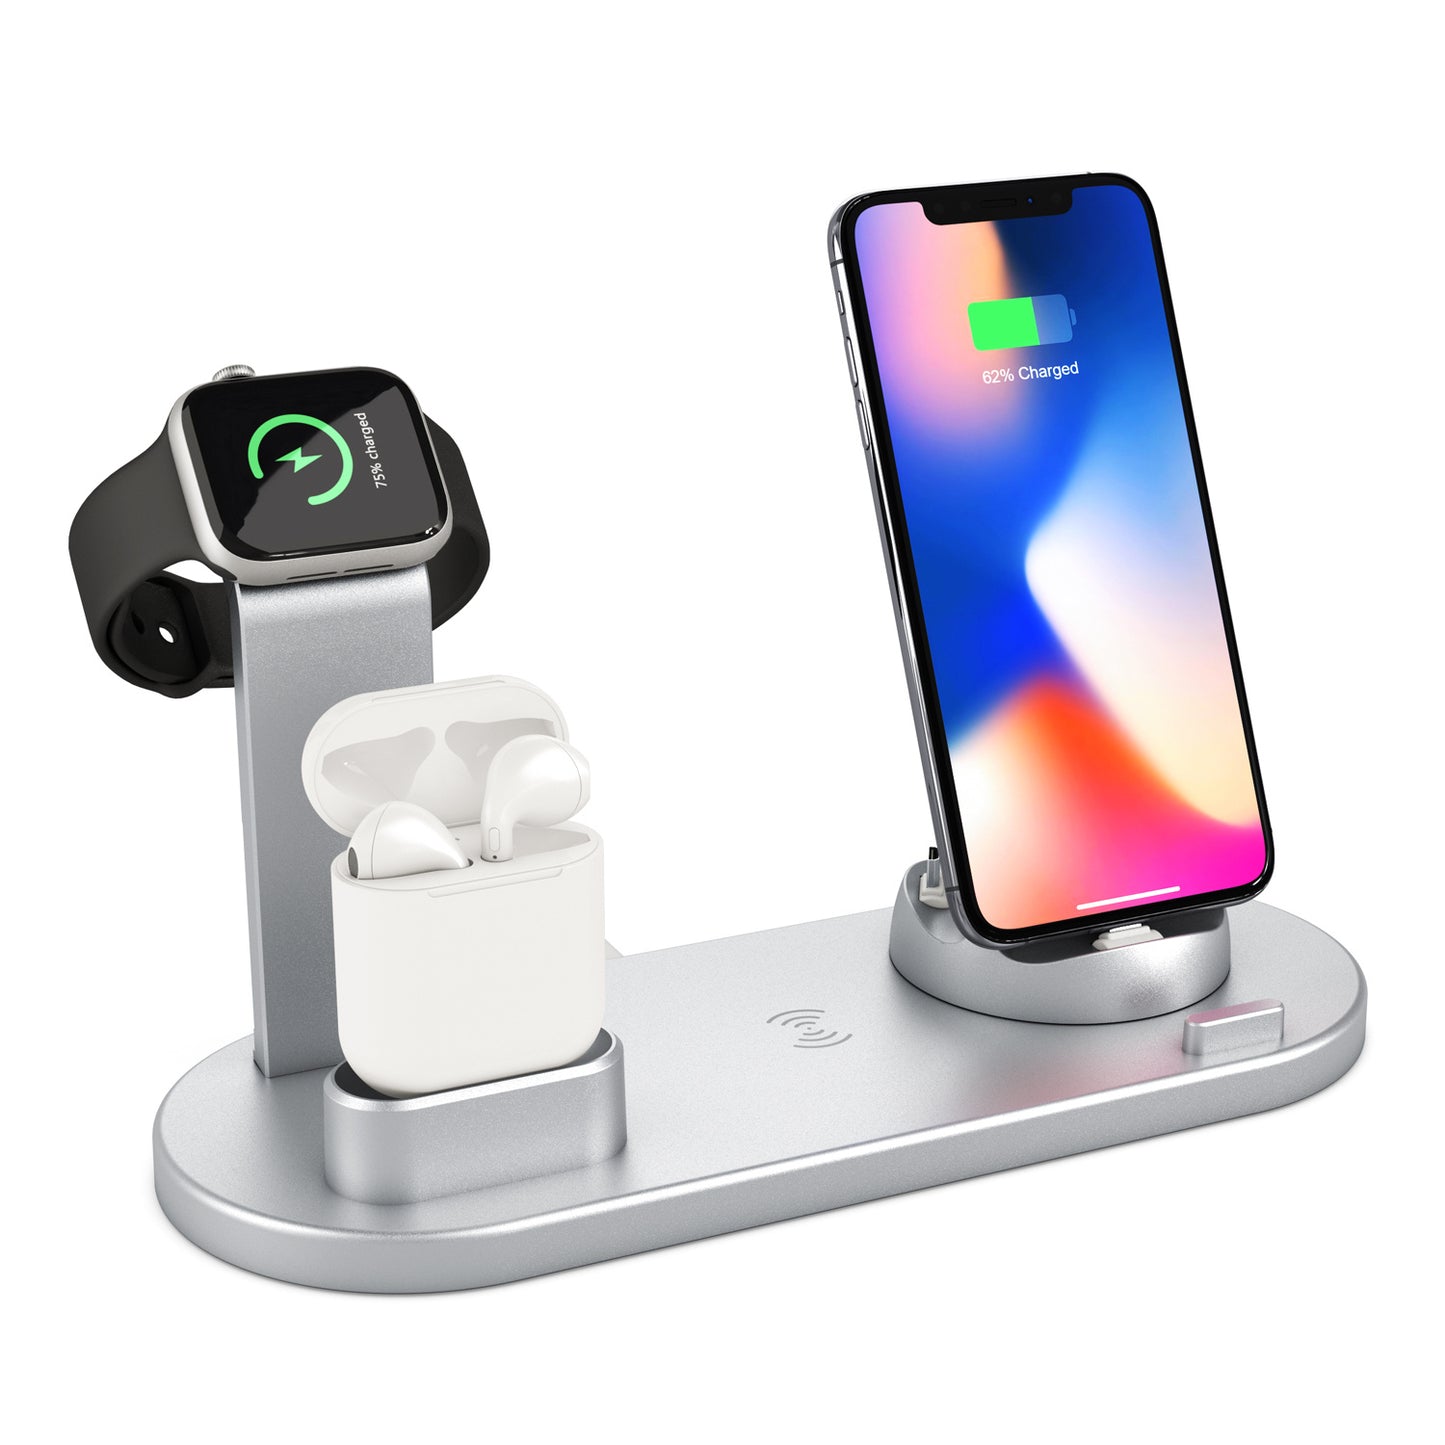 Wireless phone charger - Fayaat 